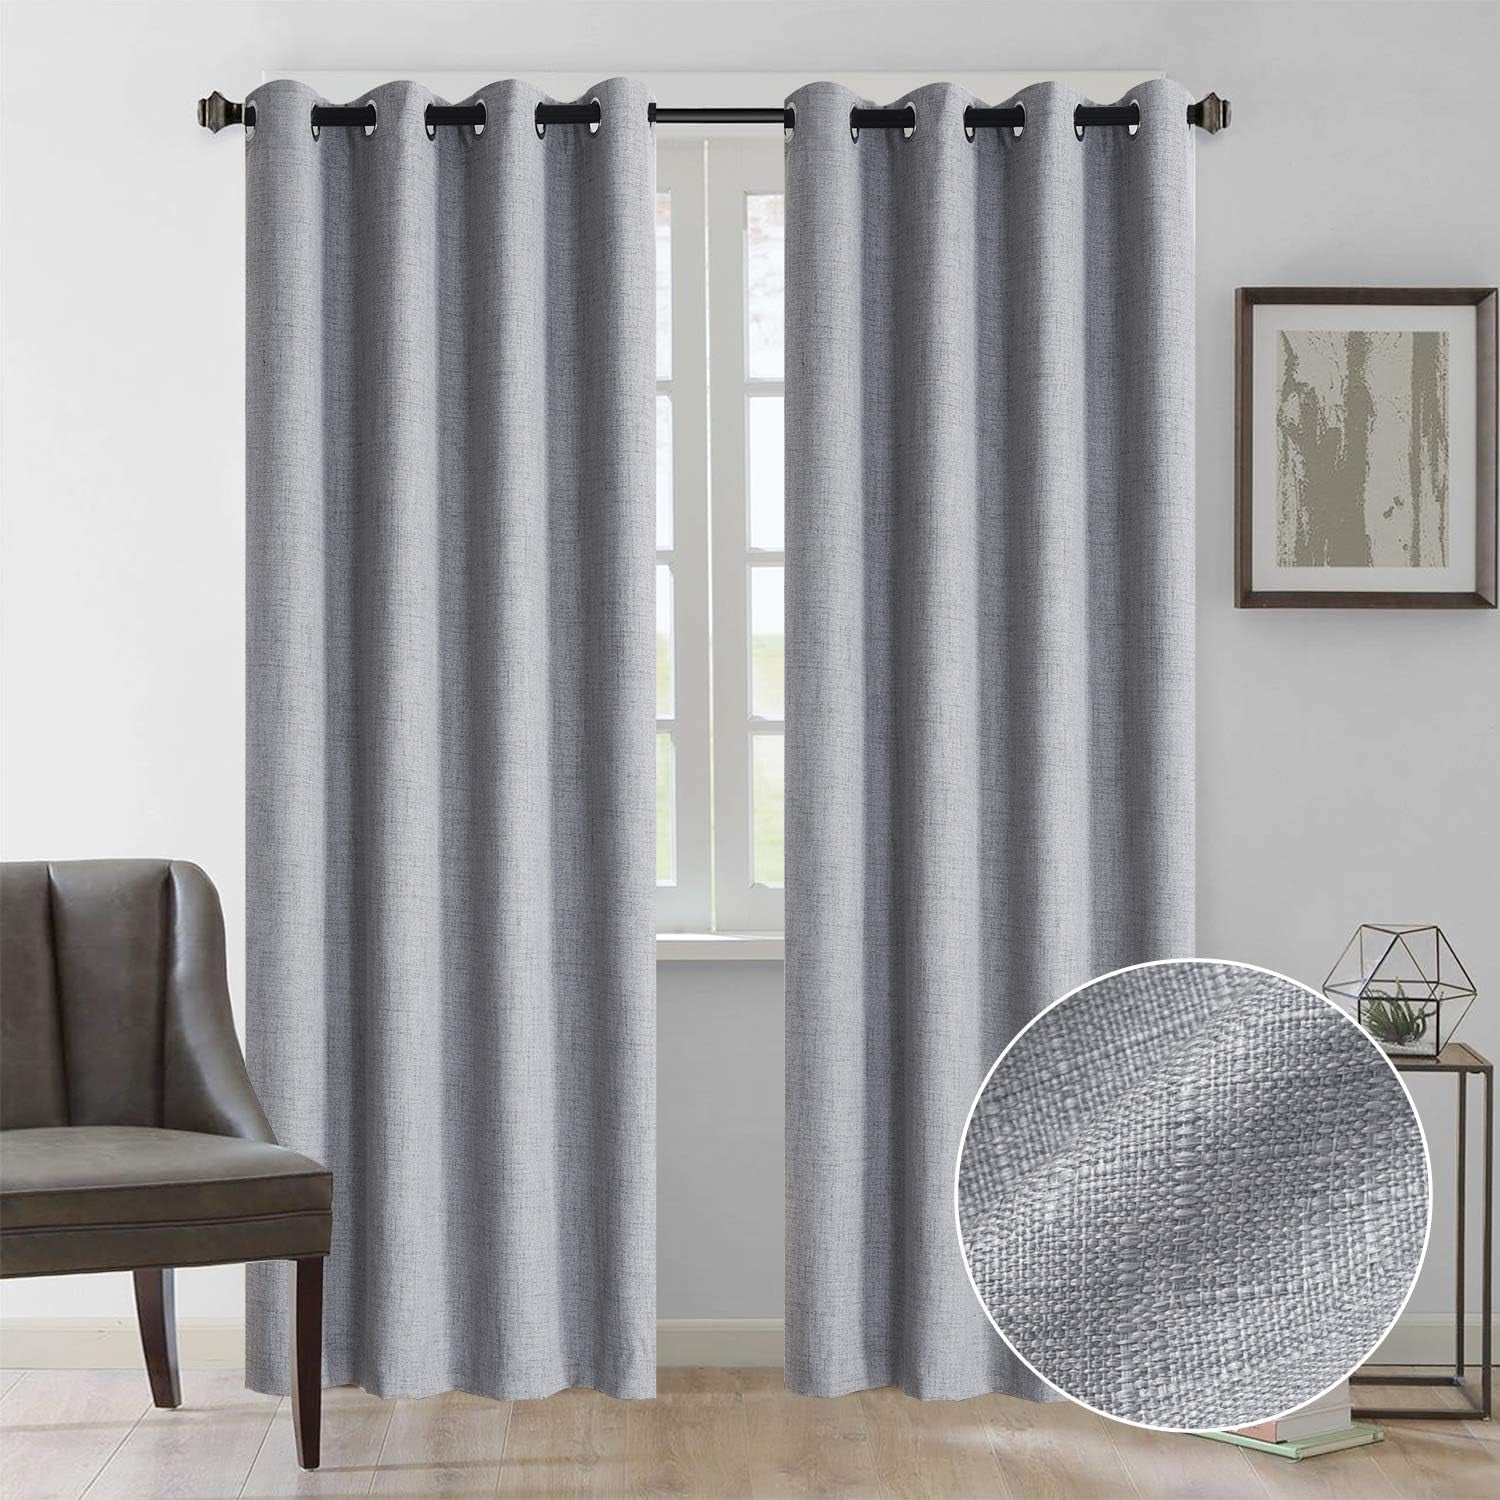 RHF 100% White Blackout Curtains for Bedroom 84 Inches Long (With Liner), White Linen Blackout Curtains for Living Room 2 Panels Set, Grommet Curtains & Drapes, Burlap Curtains- 2 Panels, 50X84  Rose Home Fashion Grey W50 X L96 